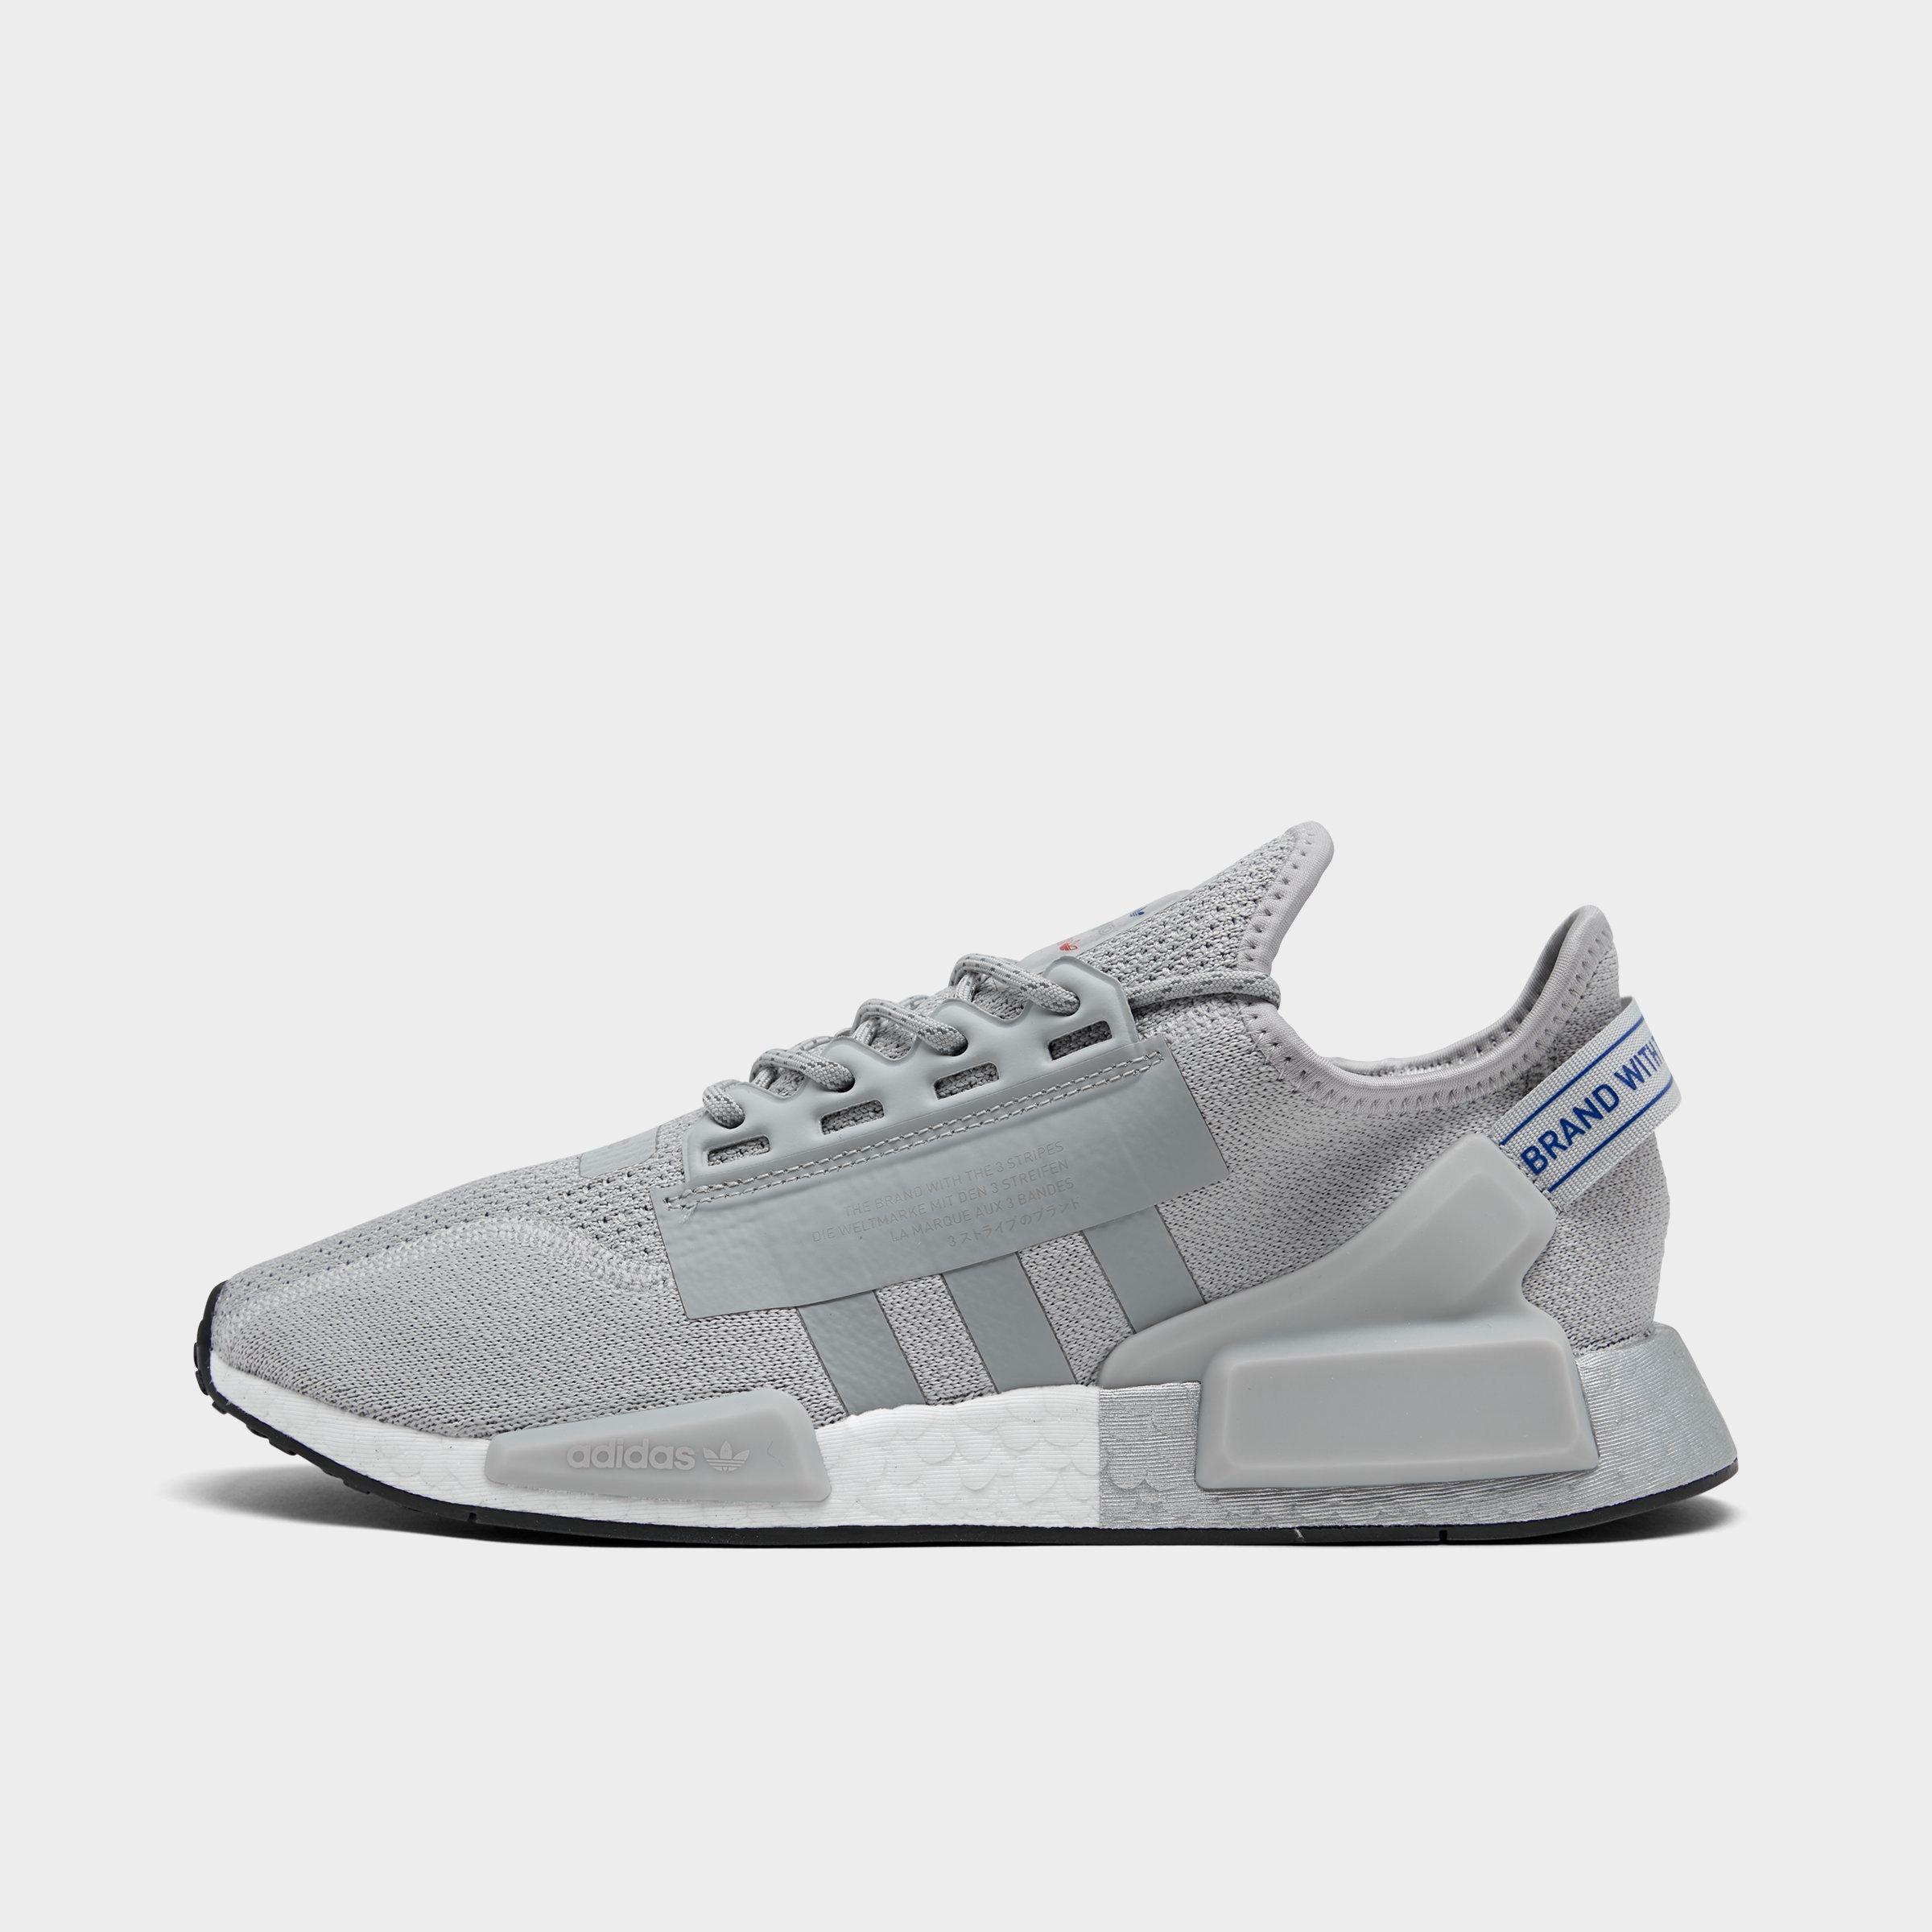 adidas nmd r1 off white lush red OFF 65% wwwbutccoza